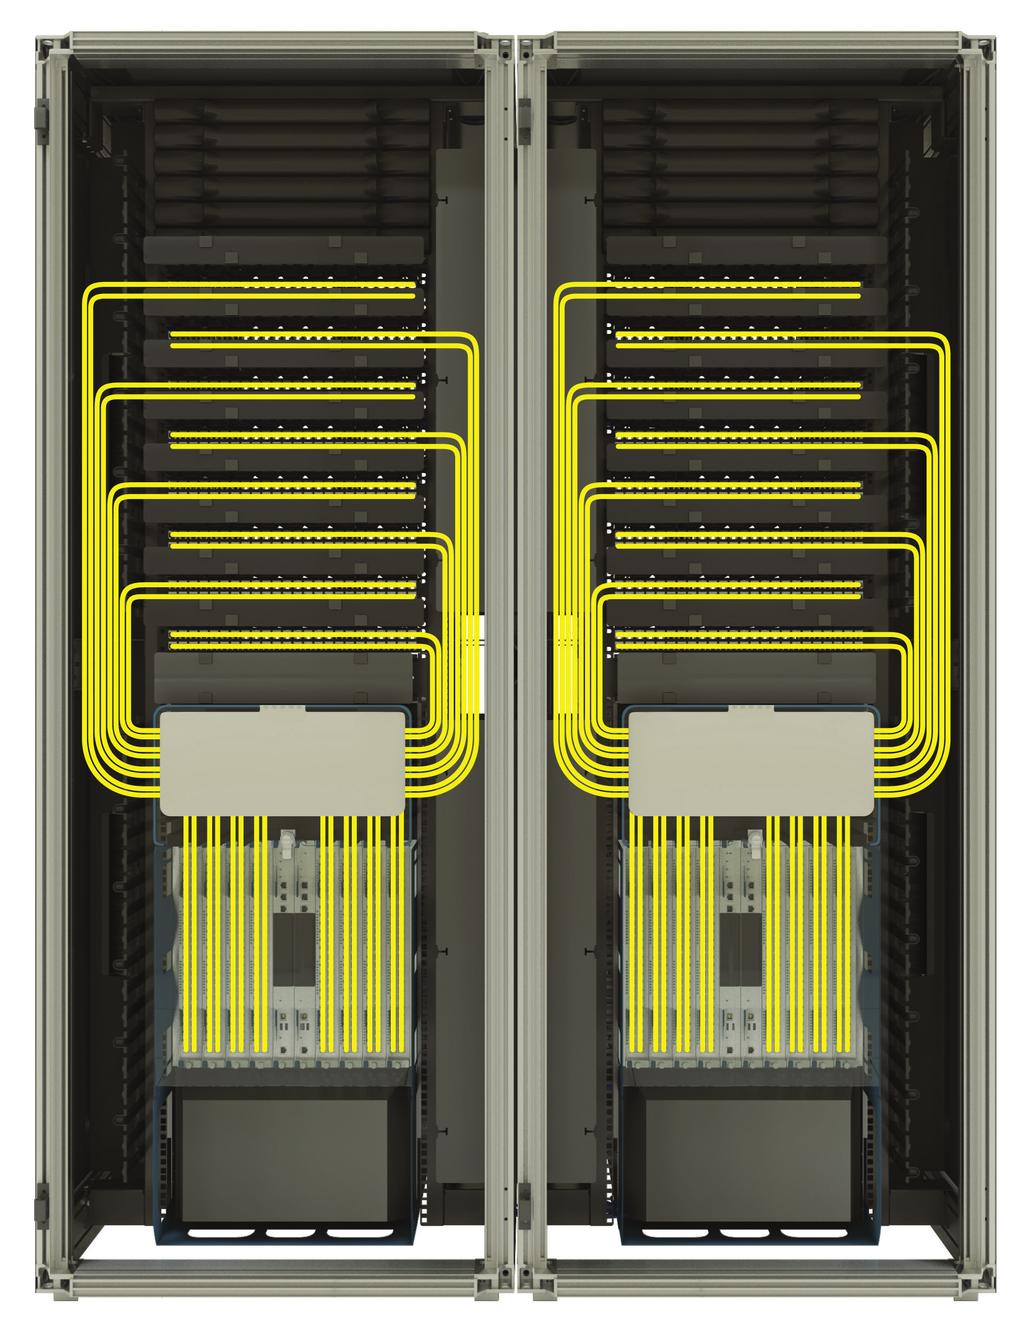 APPLYING PROPER CABLE MANAGEMENT IN IT RACKS Cable Management In Network Cabinets Network cabinets house network